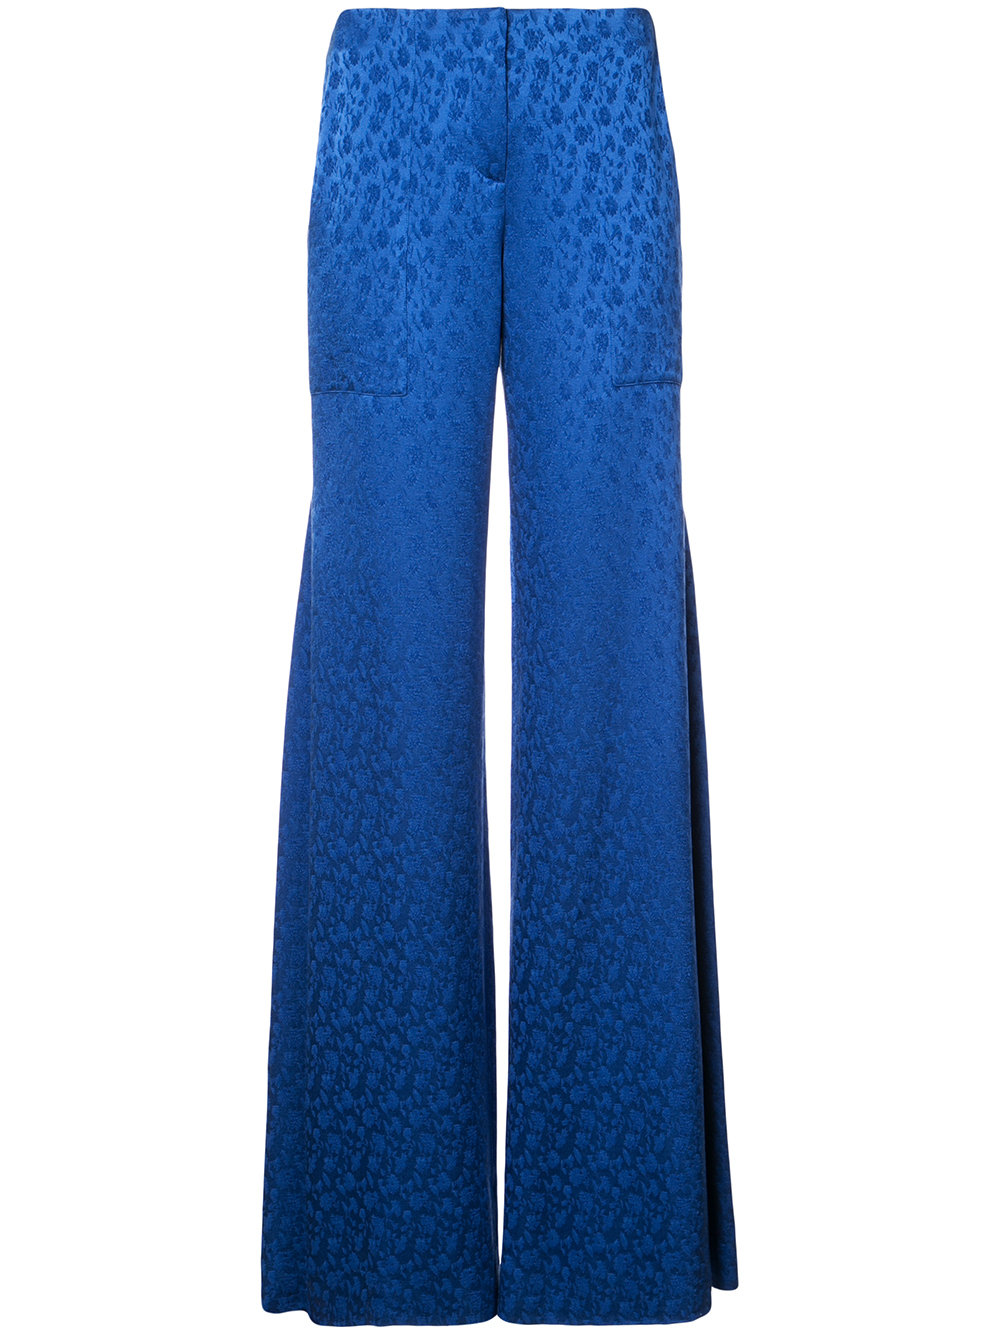 Hellessy Trousers, $920